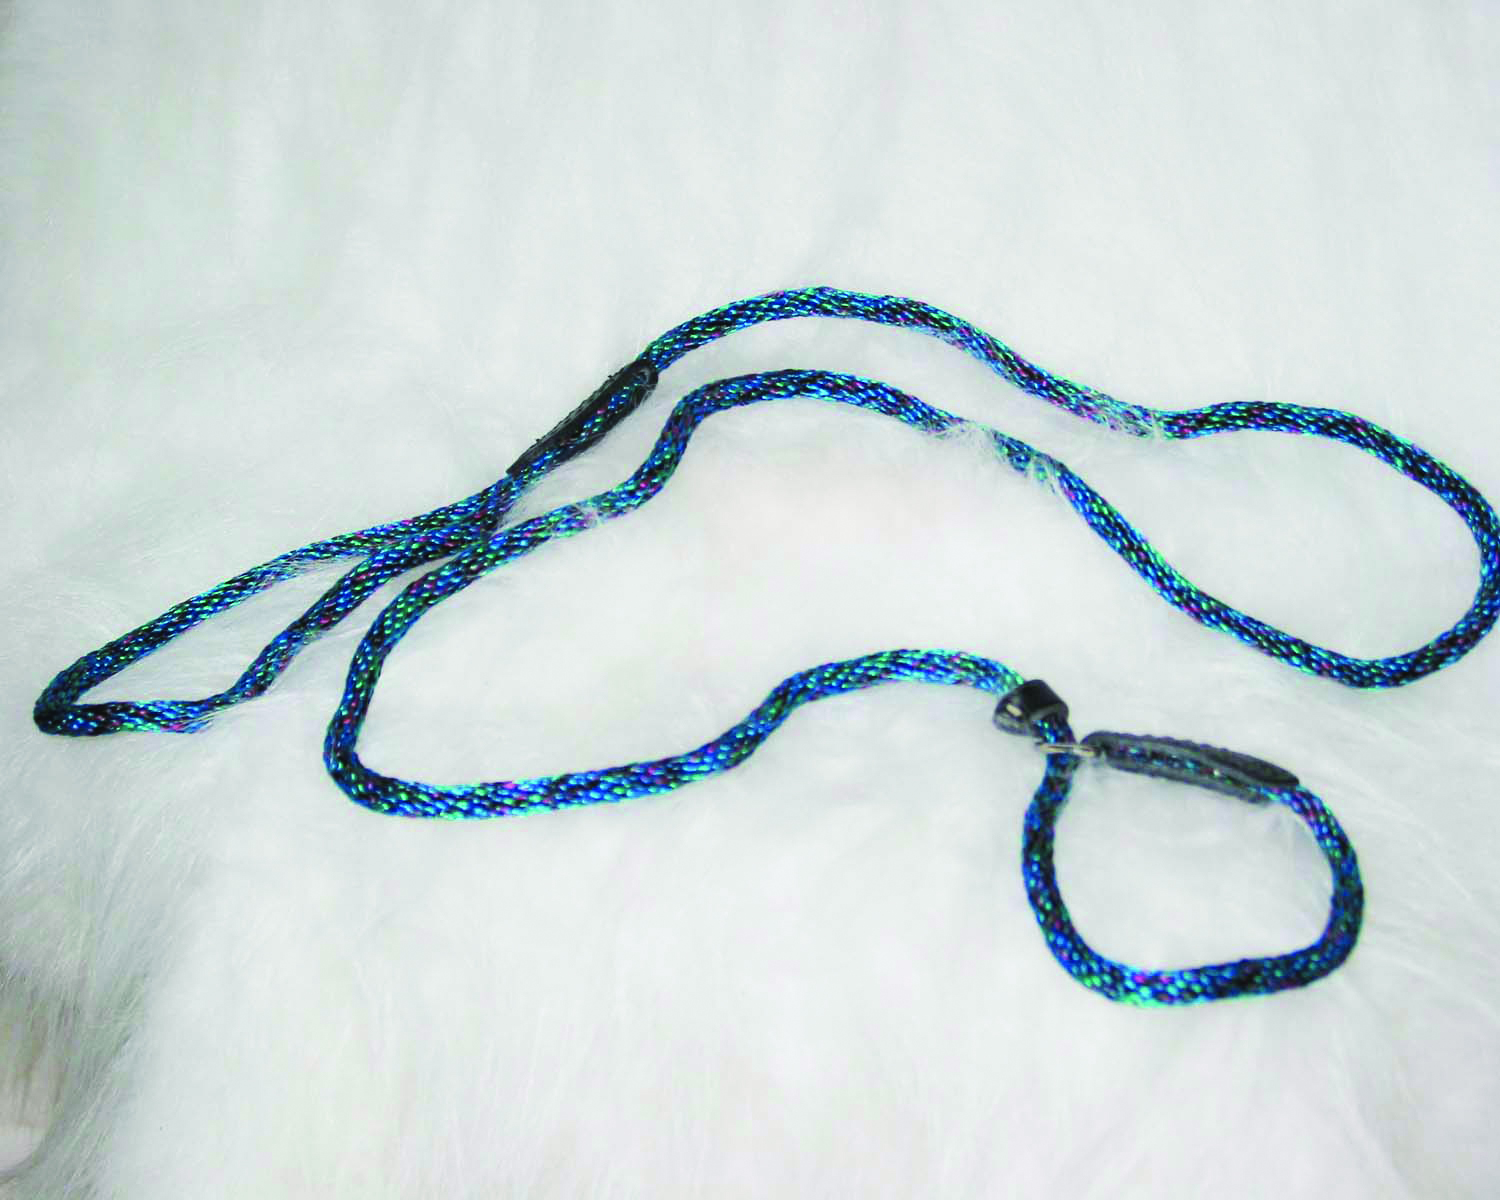 6' Quik Leash and Collar - Blue/Green